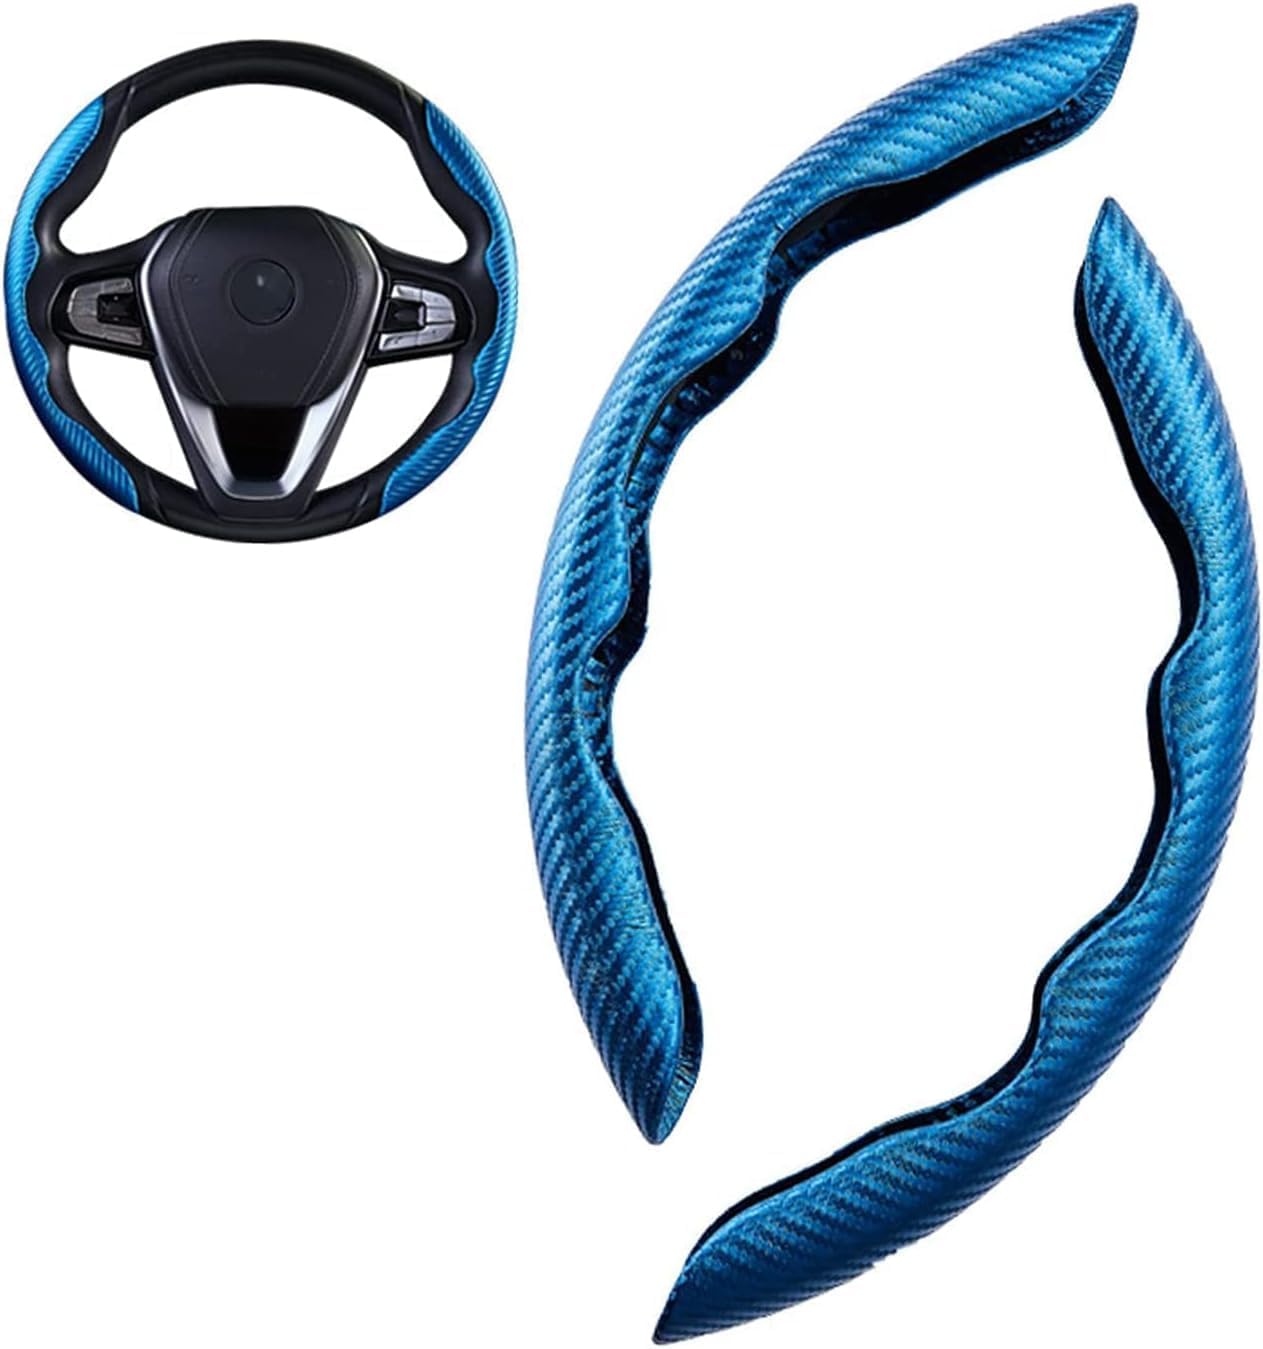 Pack of 2 Car Steering Wheel Covers,for Volvo Xc60 Carbon Fibre Segmented Breathable Non-Slip Durable Interior Accessories.,C-Blue von ANRAM